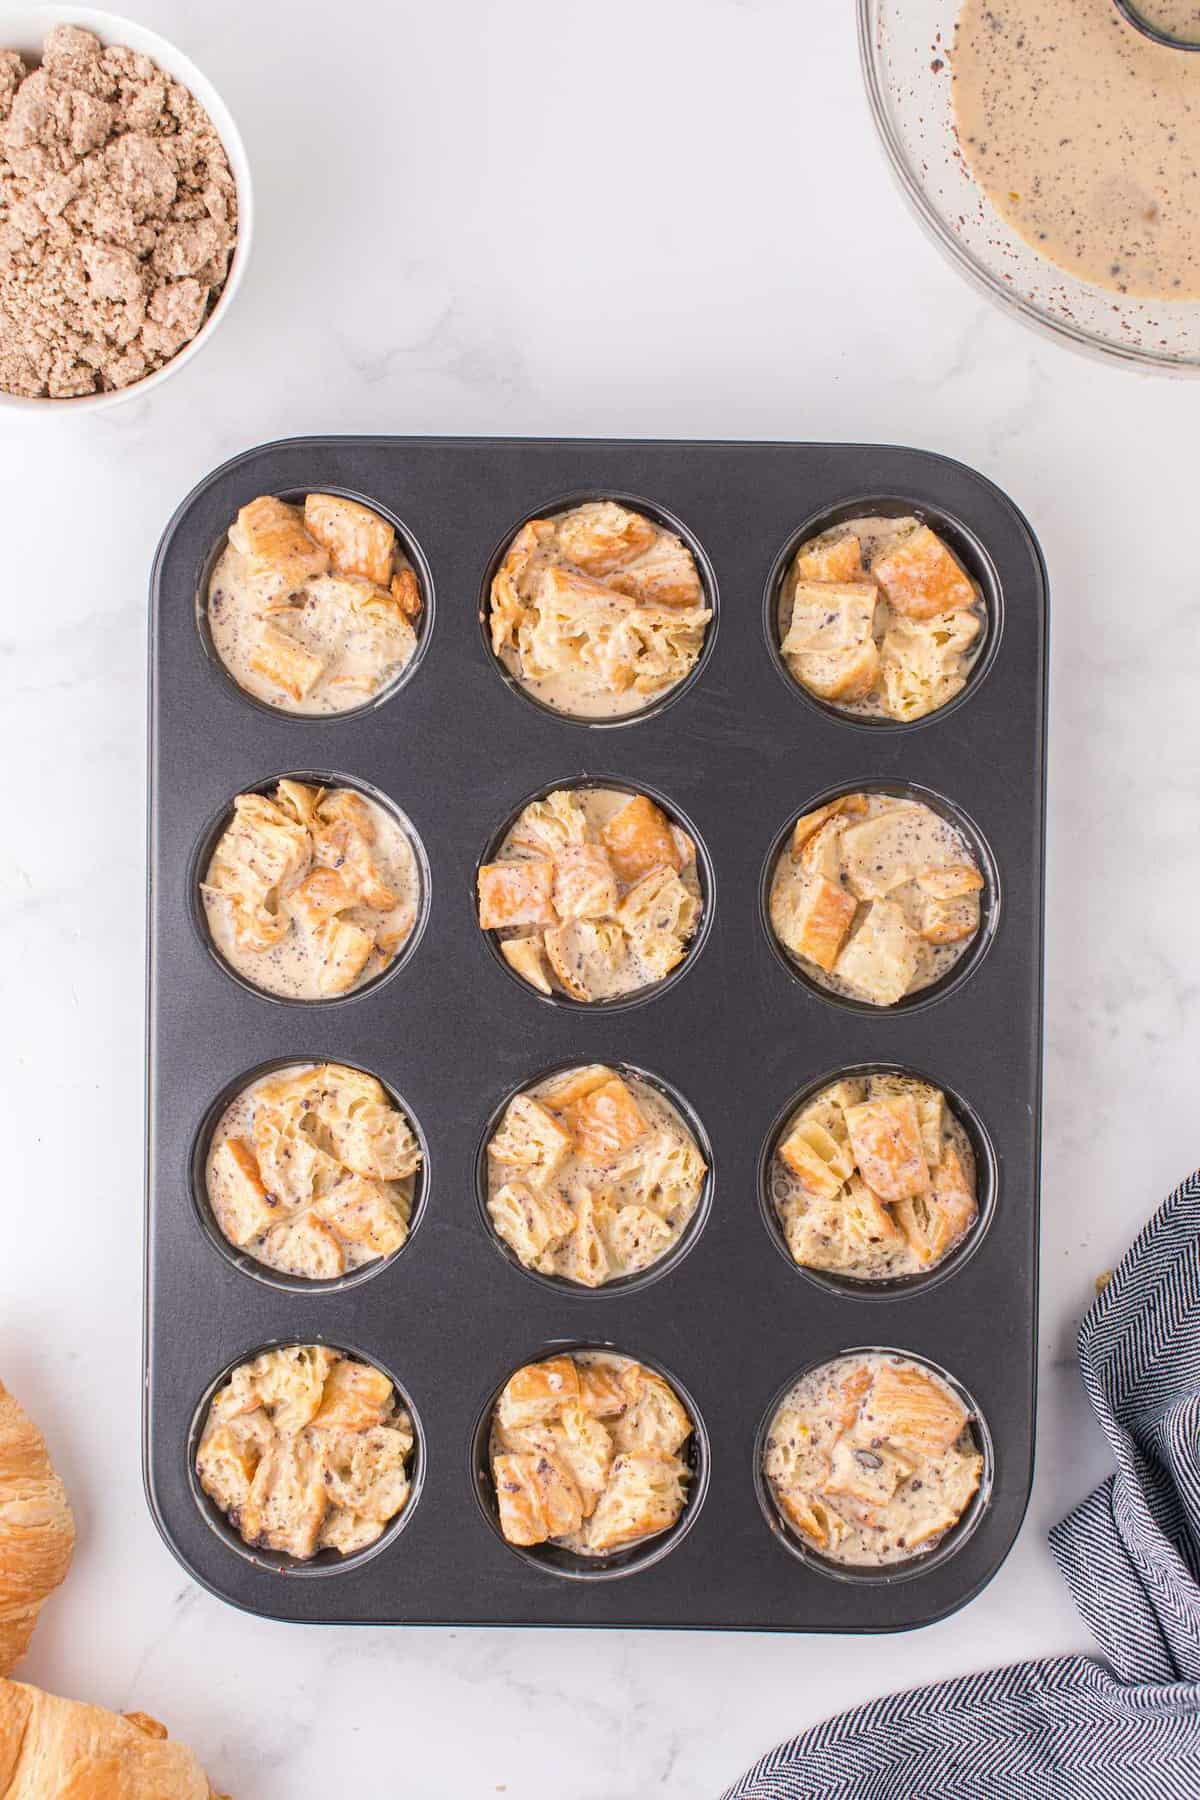 pour the mixture into the muffin tins